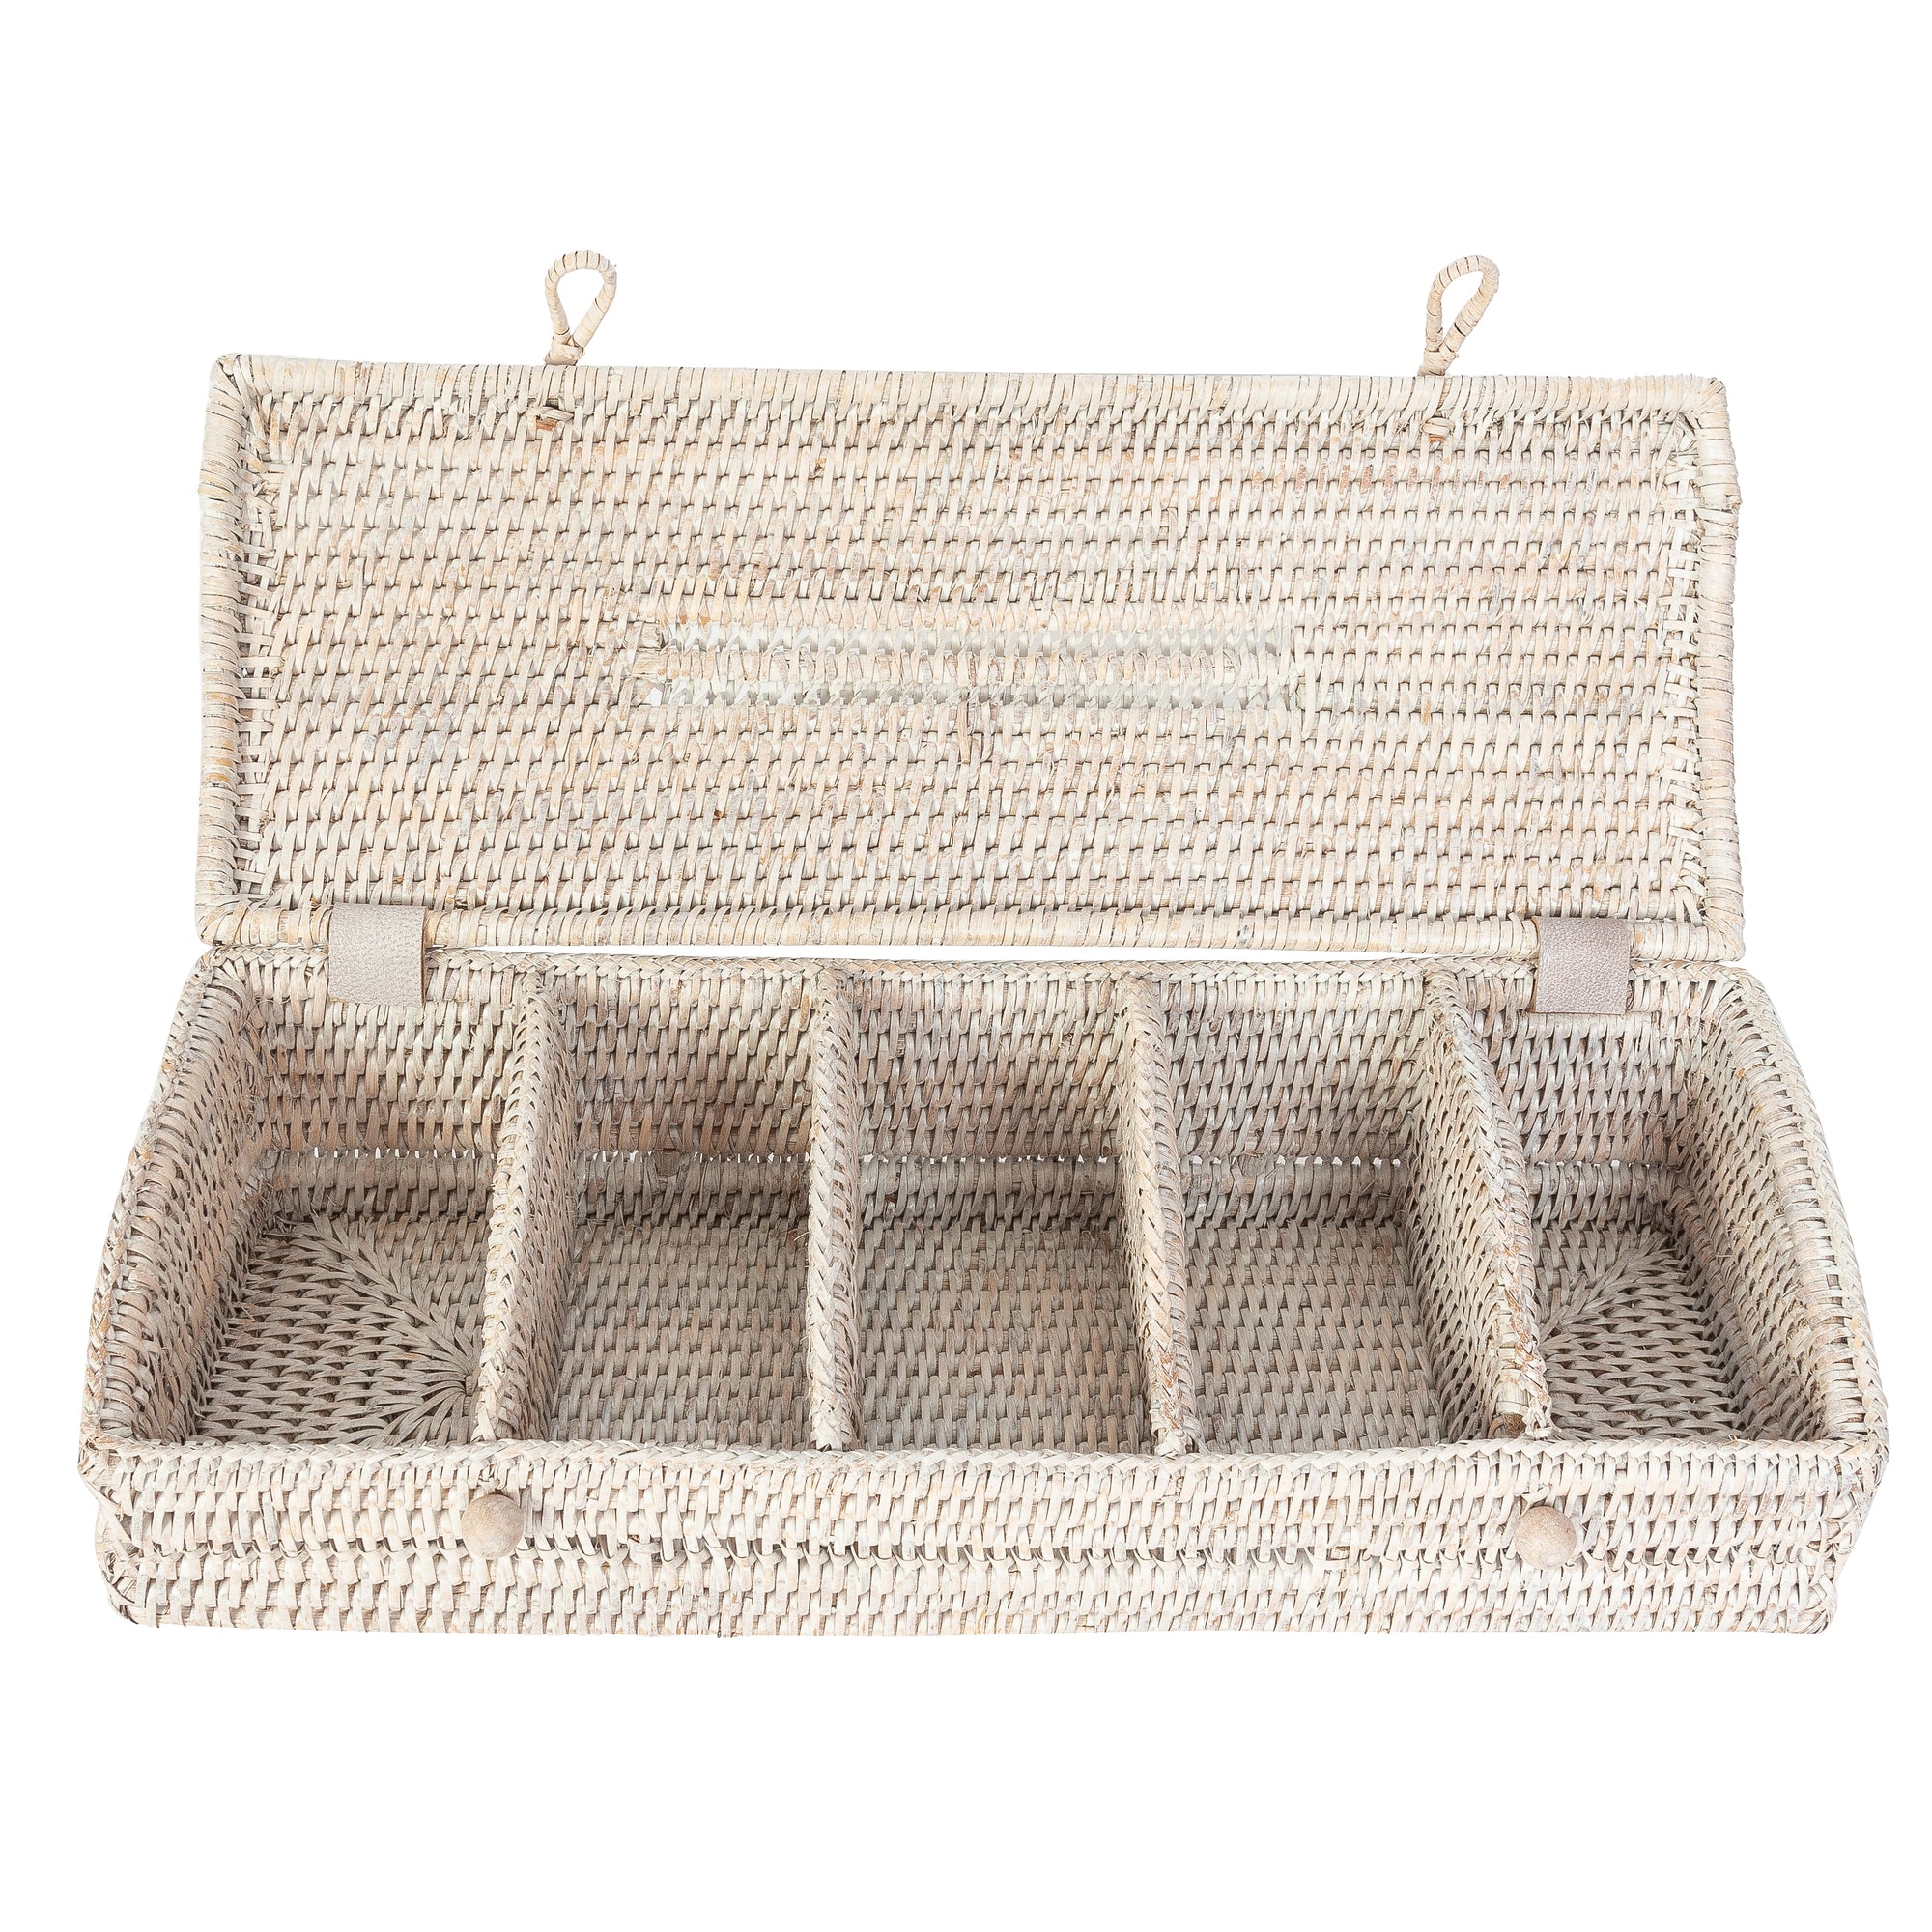 5 Section Tea Box with Lid